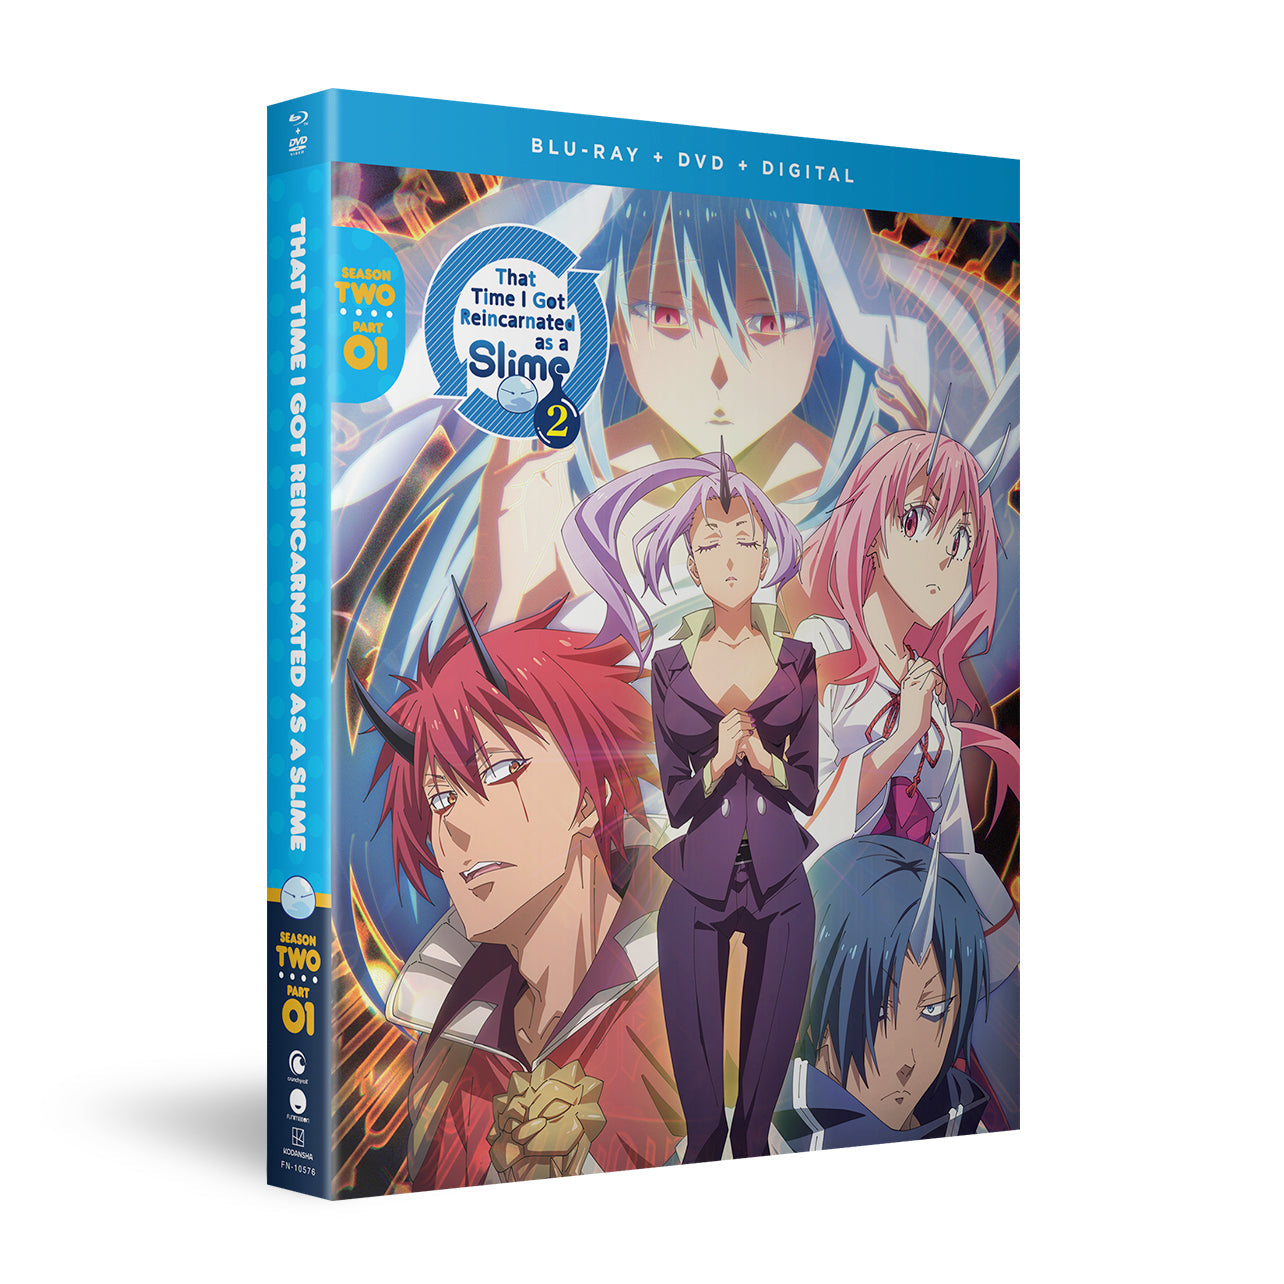 That Time I Got Reincarnated as a Slime - Season 2 Part 1 - Blu-ray + DVD image count 4